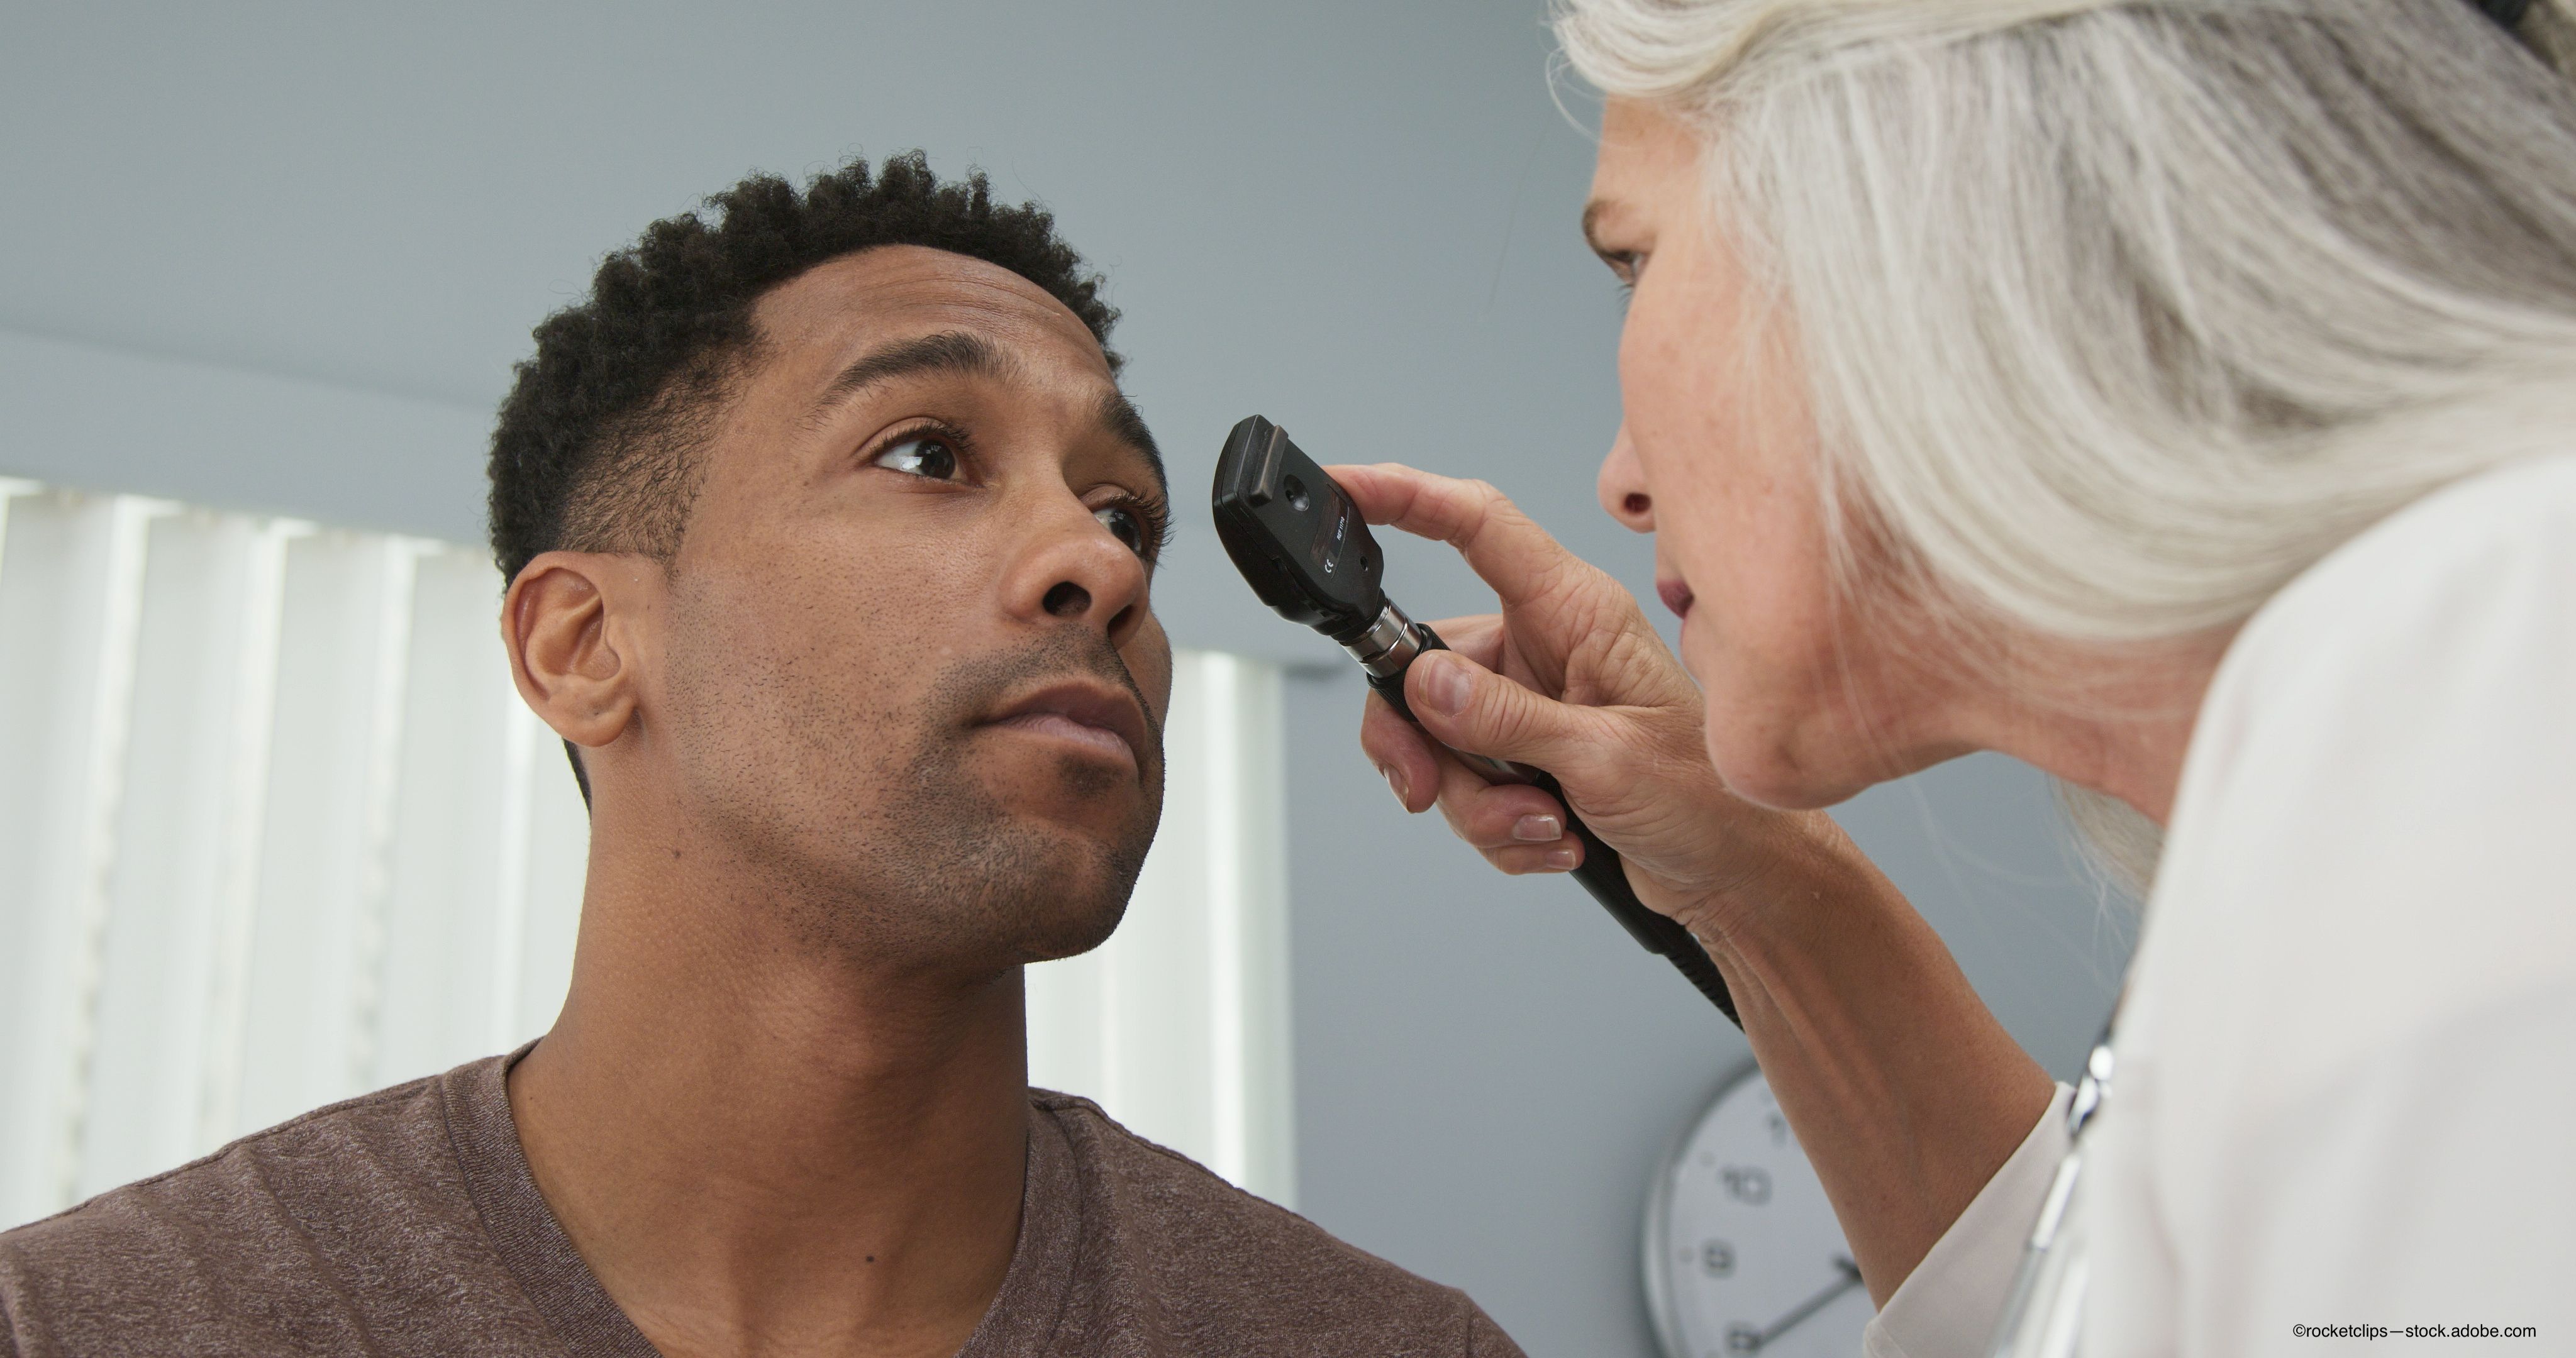 Shedding light on racial inequities in ophthalmology and ocular healthcare